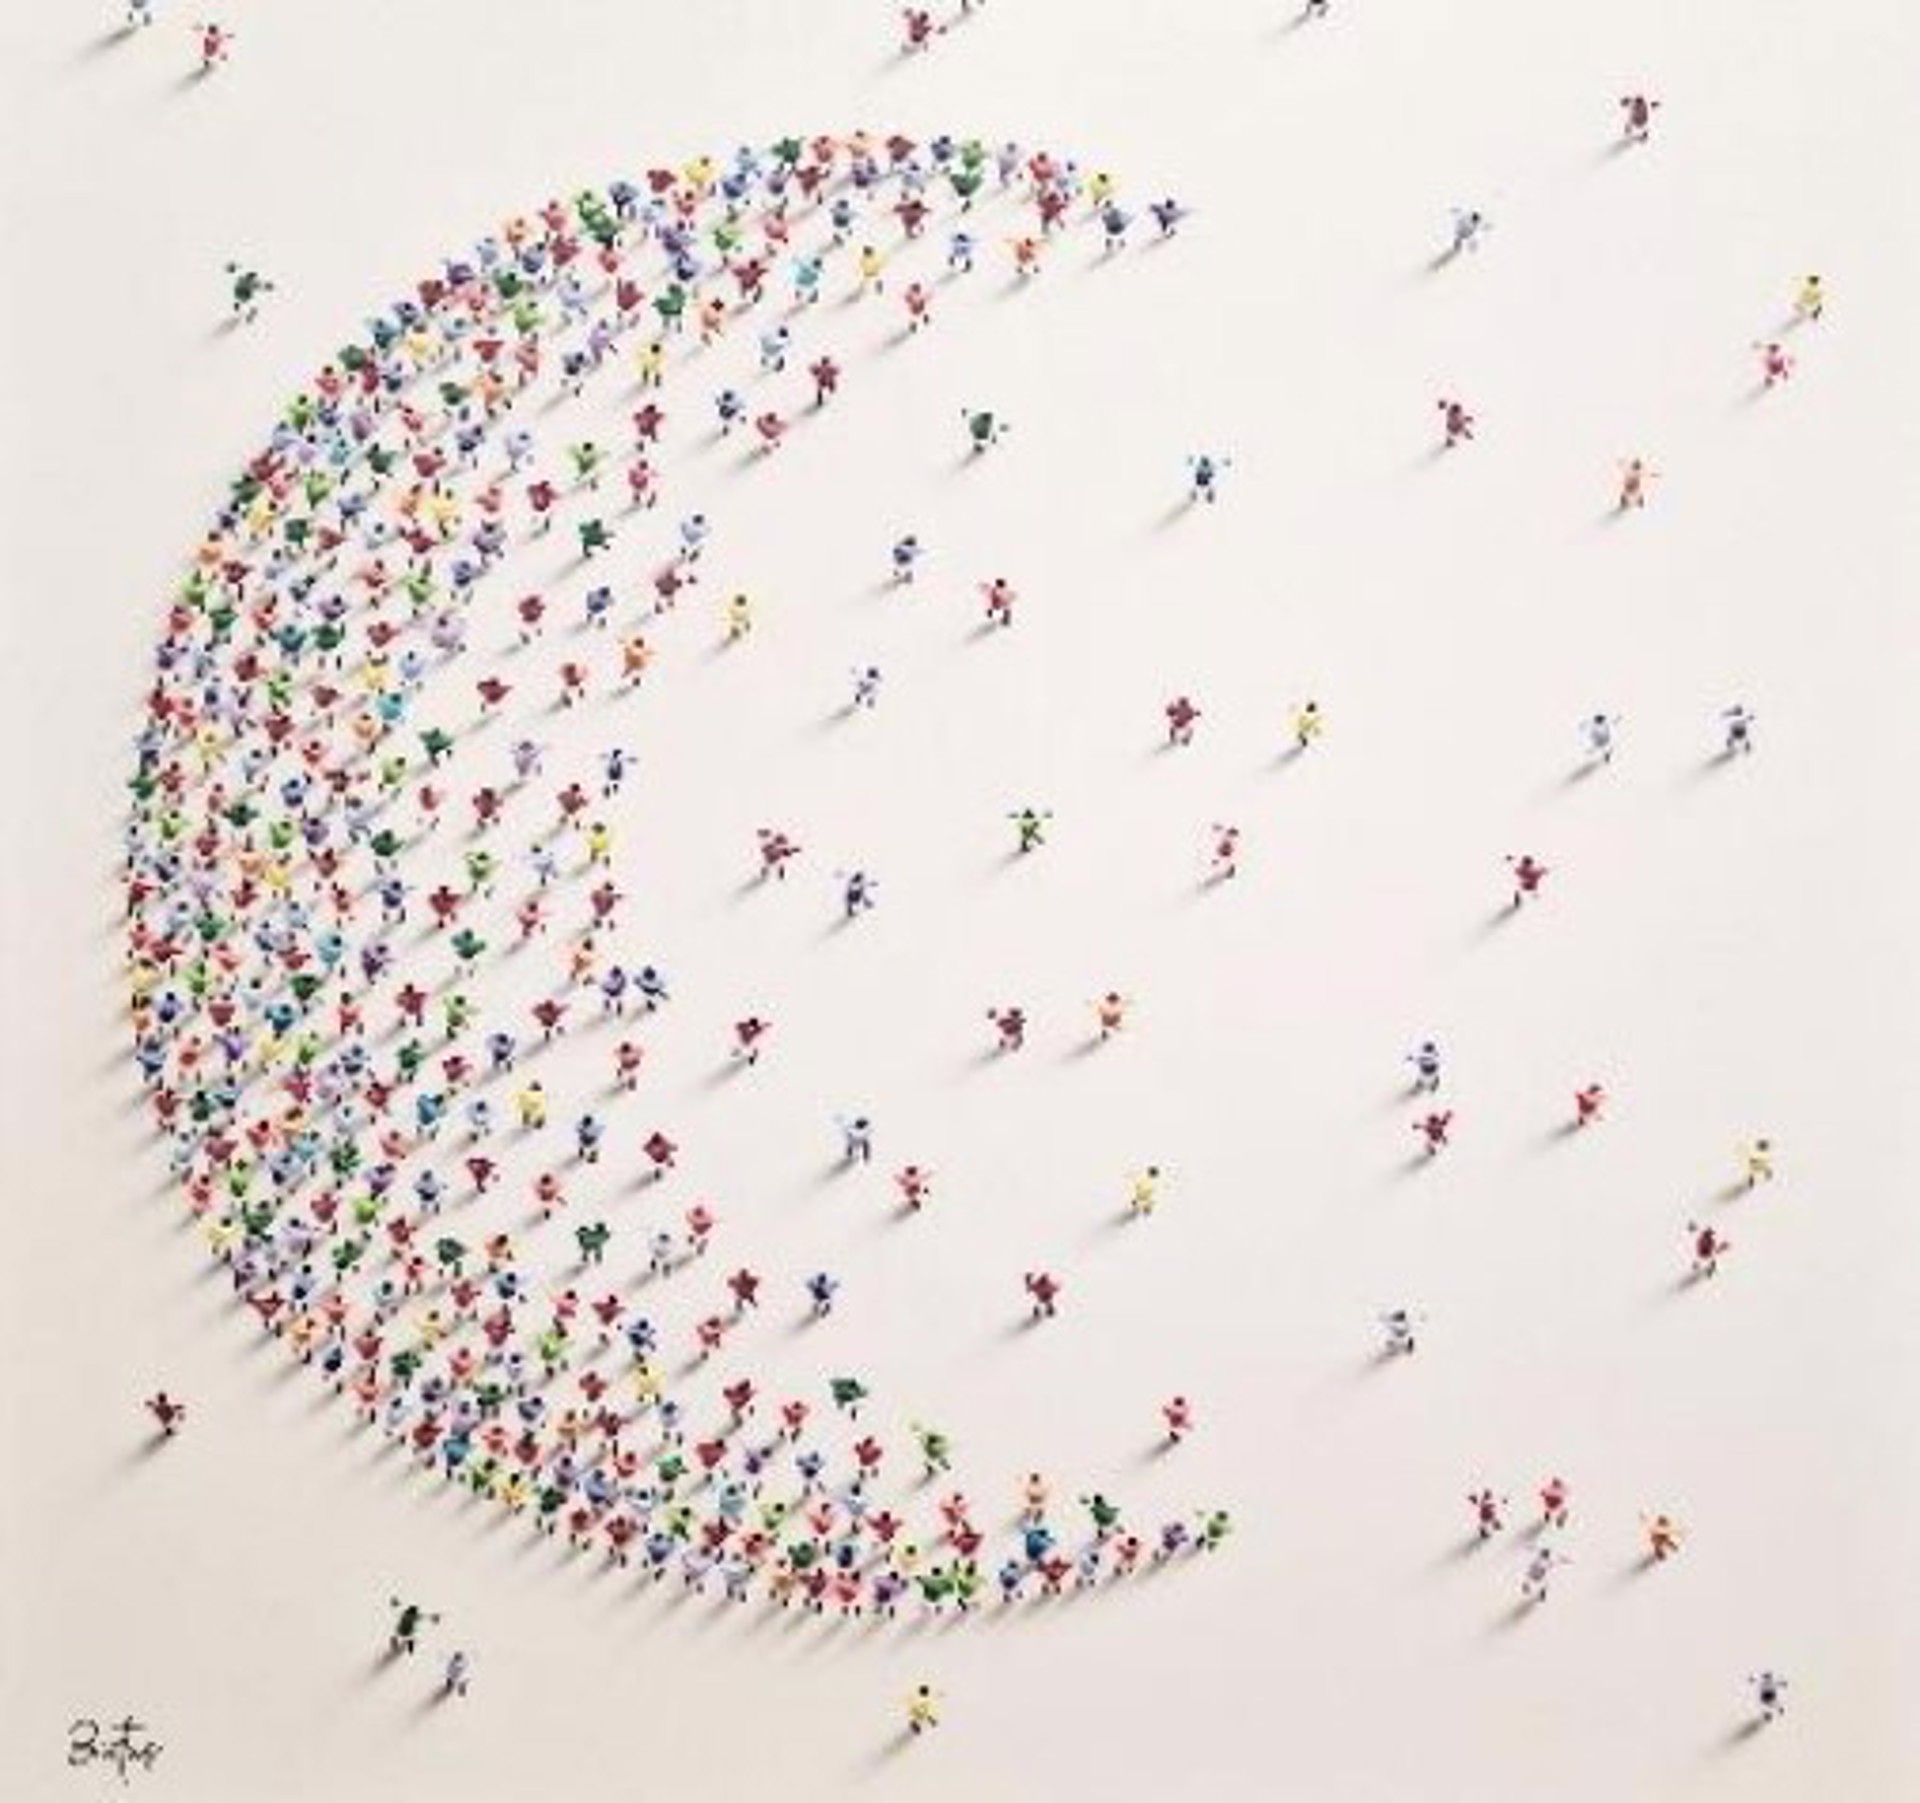 Moon Commission - similar to this photo by Francisco Bartus